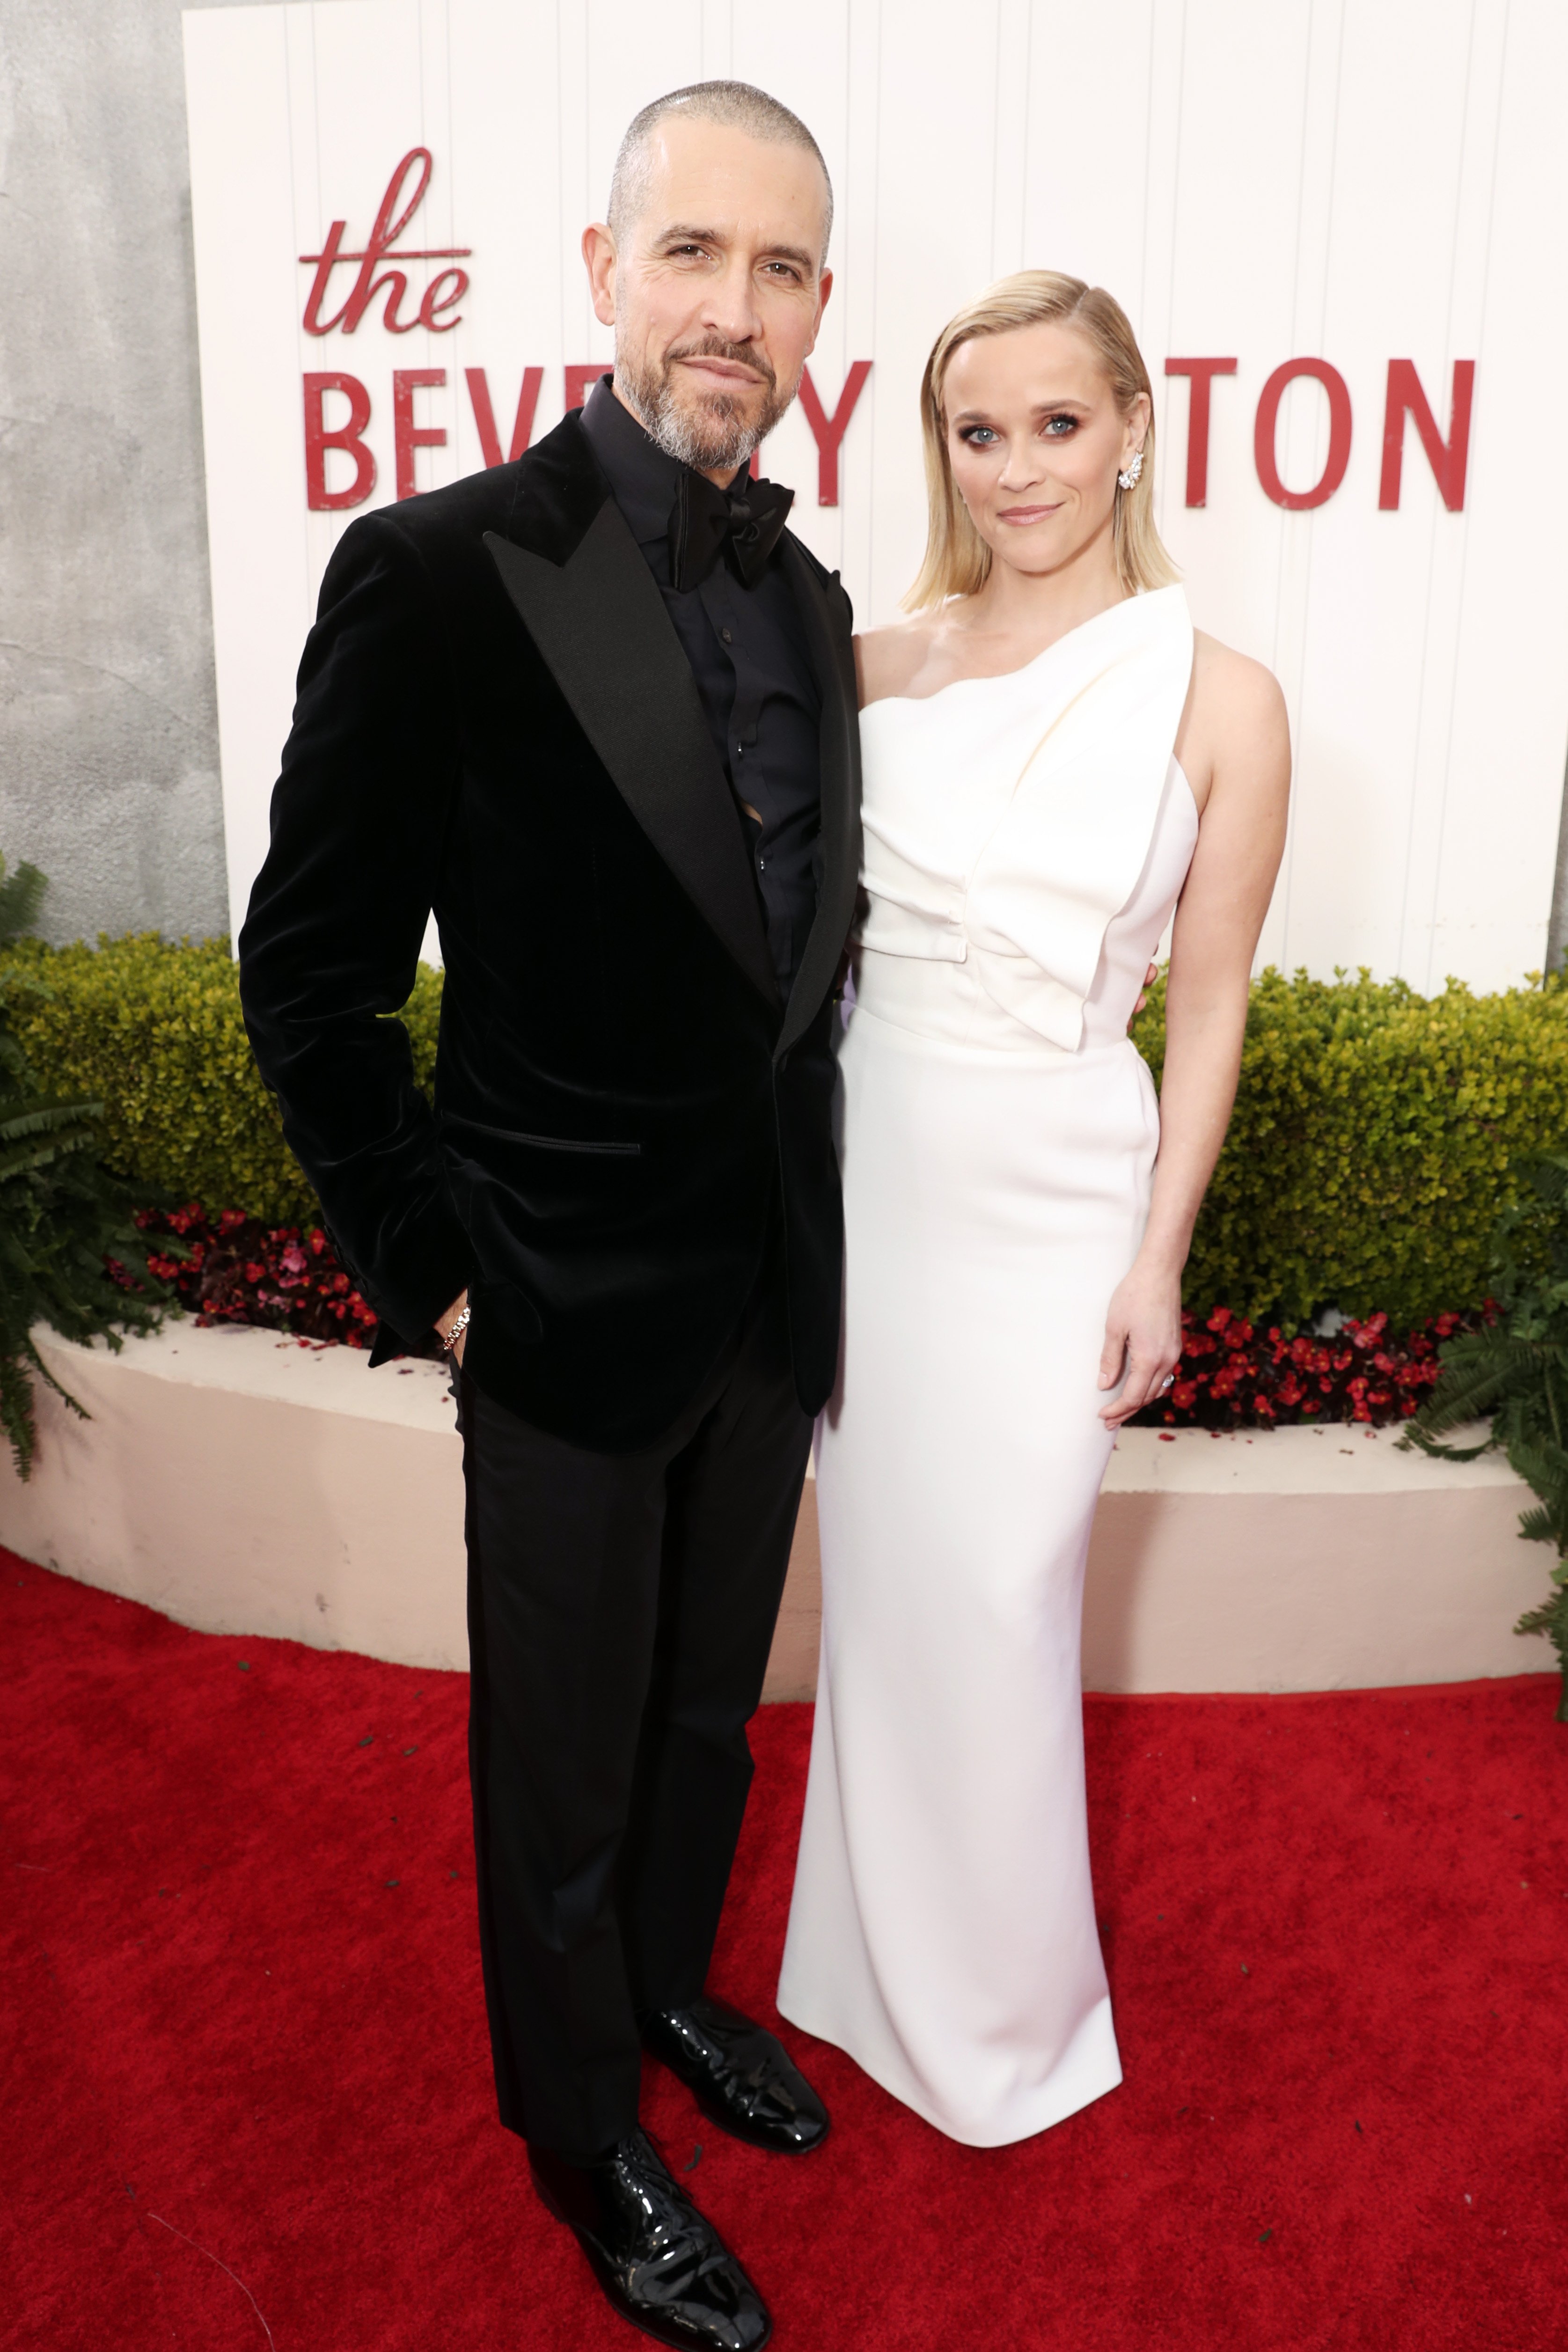 Jim Toth and Reese Witherspoon arrive to the 77th Annual Golden Globe Awards held at the Beverly Hilton Hotel on January 5, 2020 | Source: Getty Images